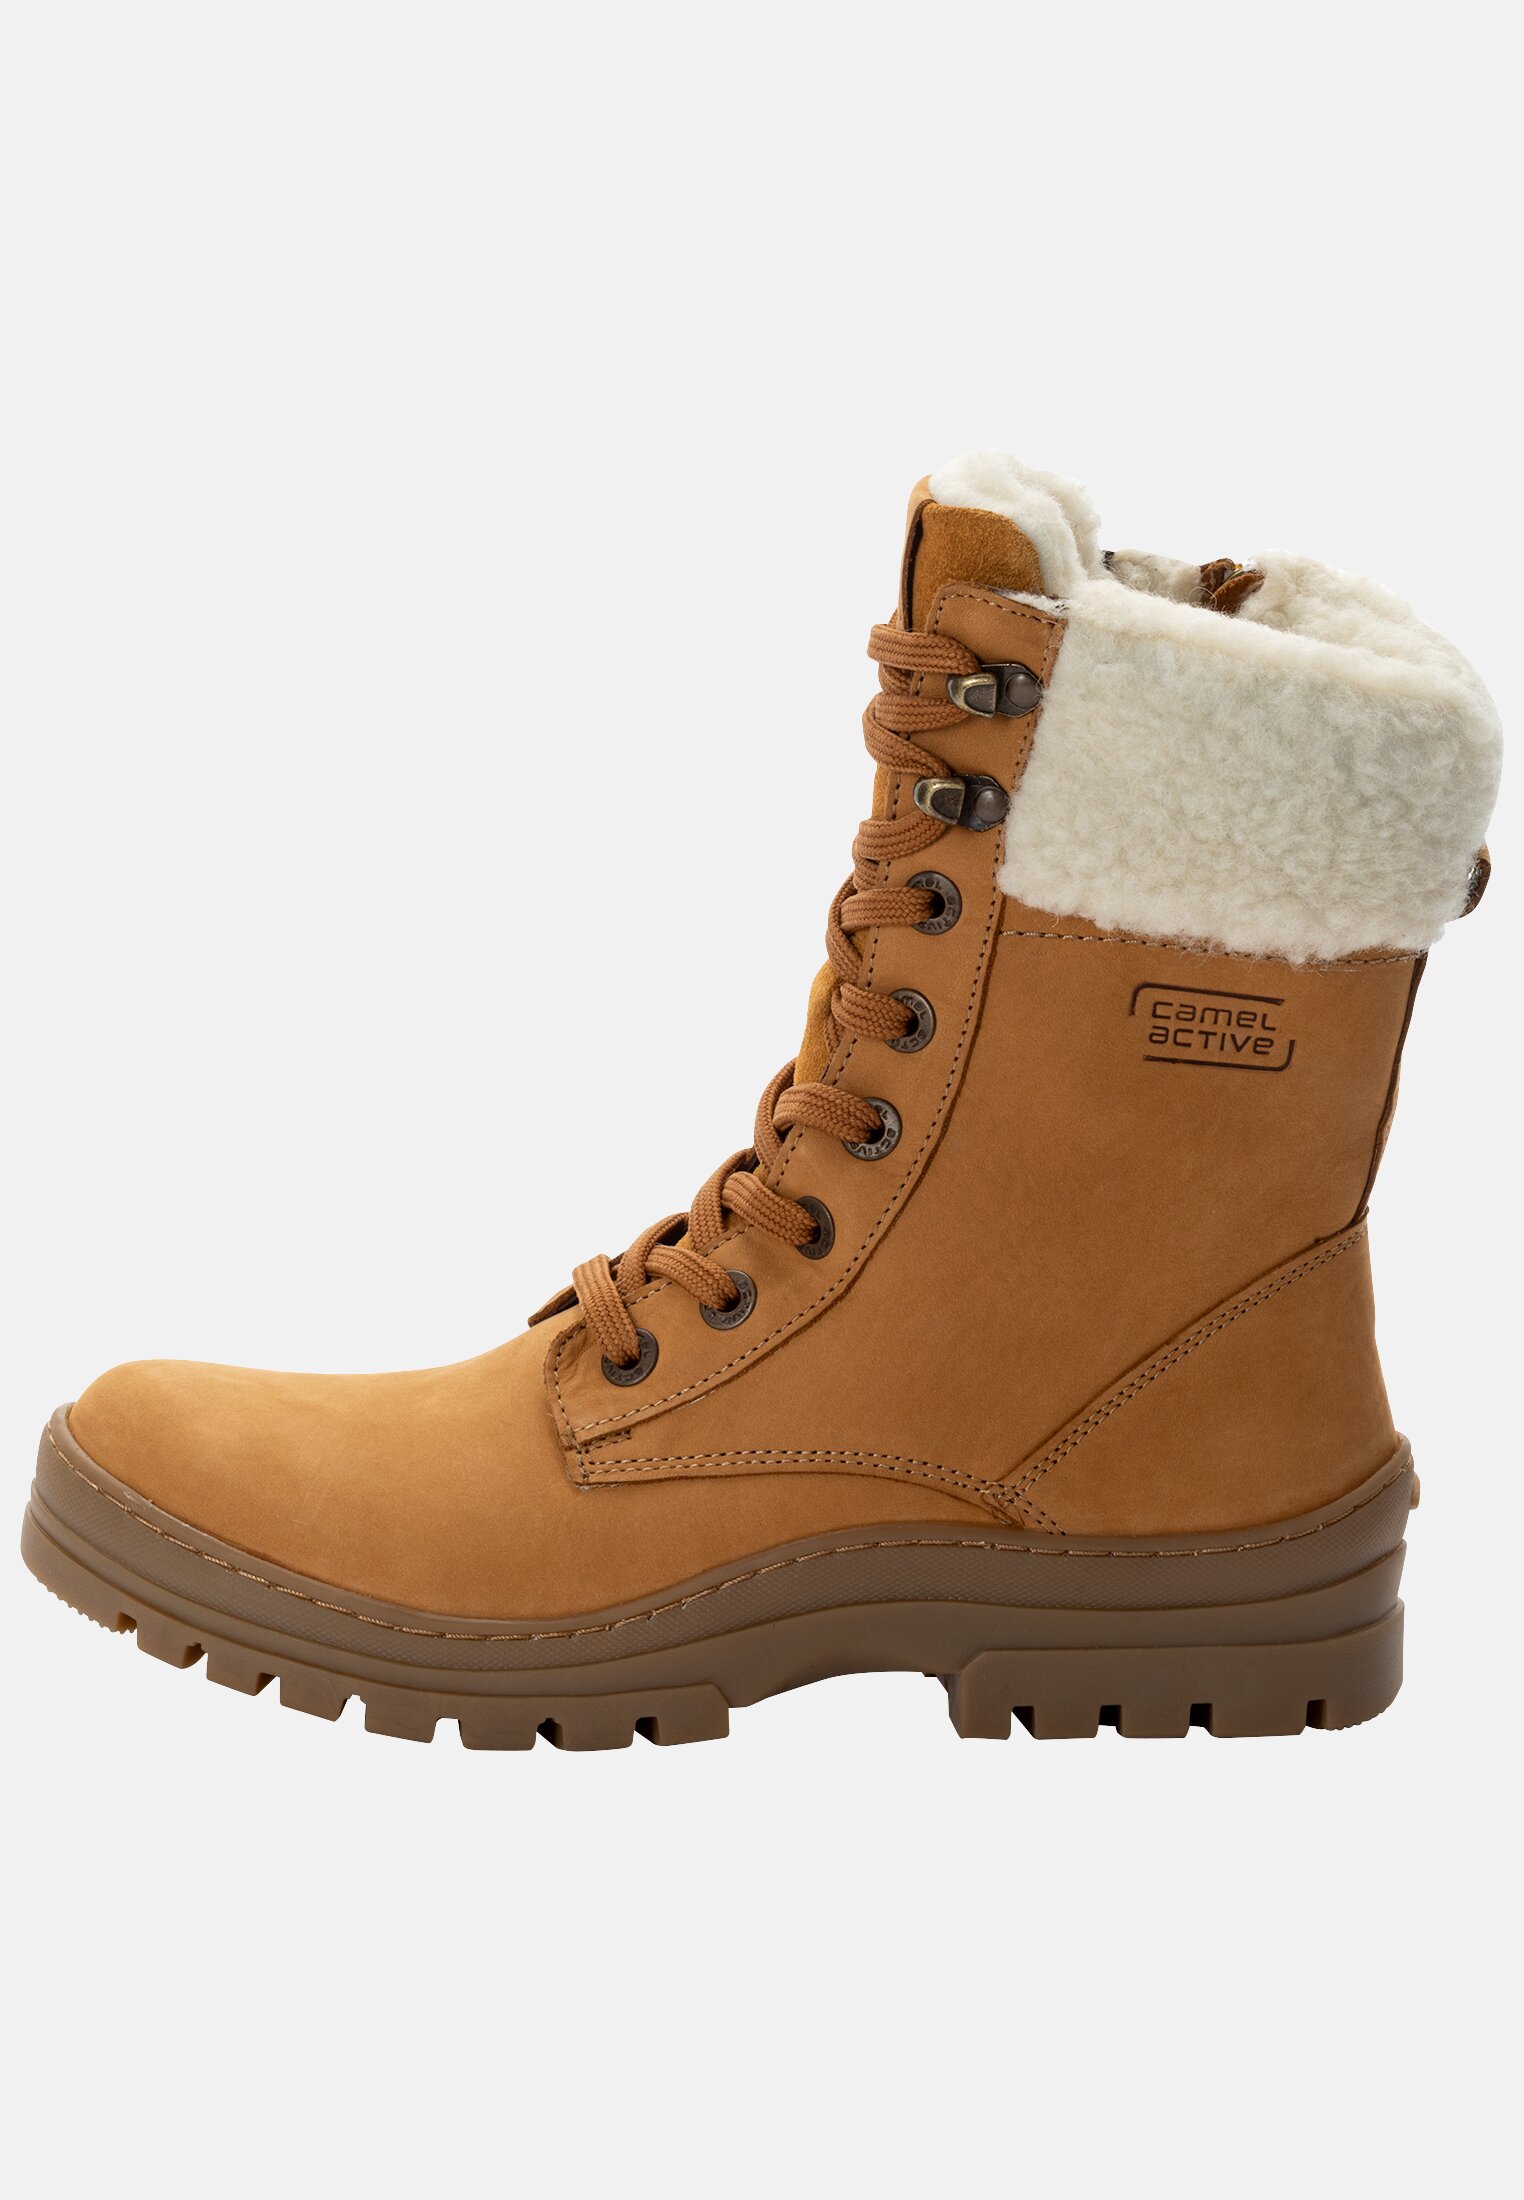 Camel Active Boots made from nubuck leather with warm wool lining